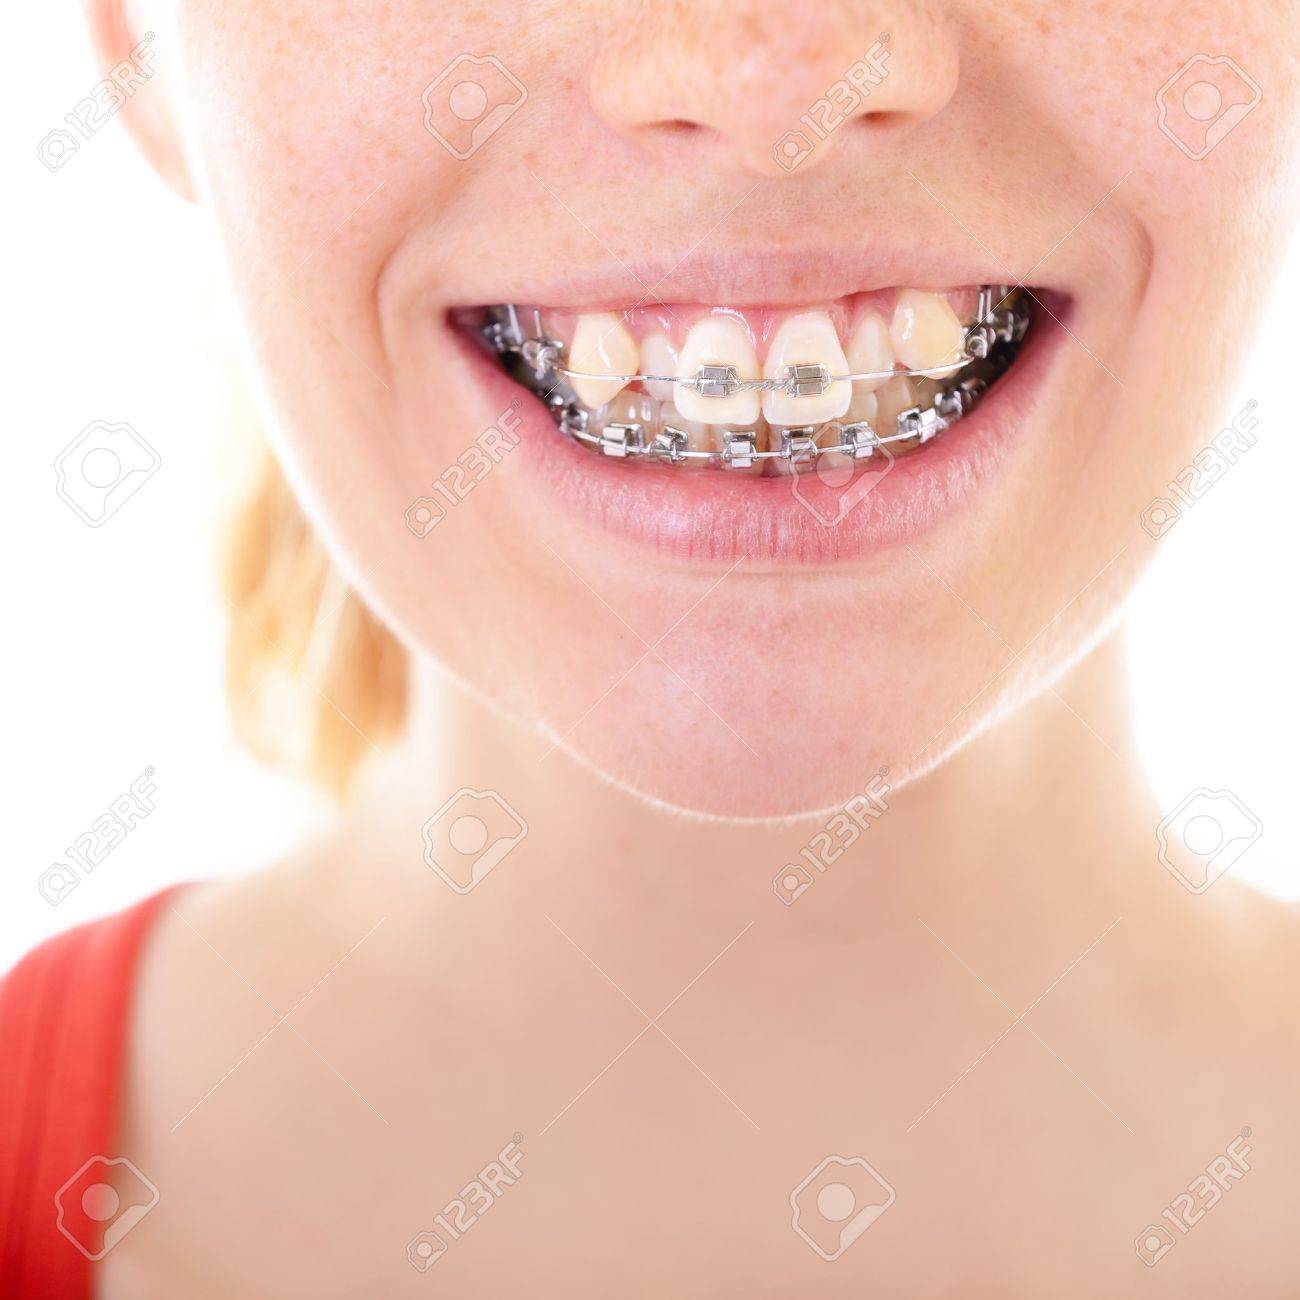 21994390-teeth-with-braces-female-mouth-with-brackets-closeup.jpg